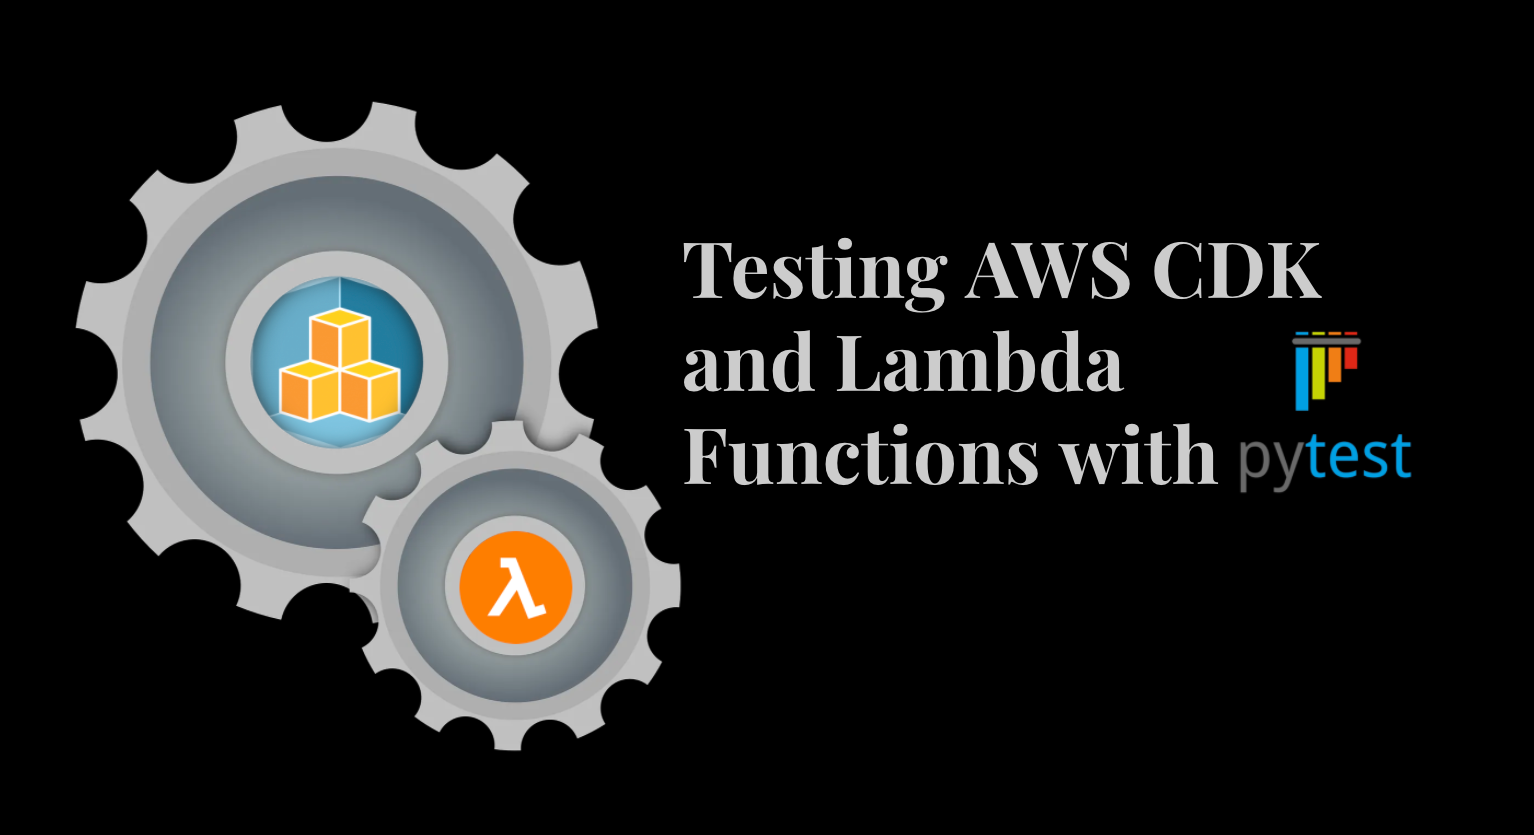 Testing AWS CDK and Lambda Functions with pytest